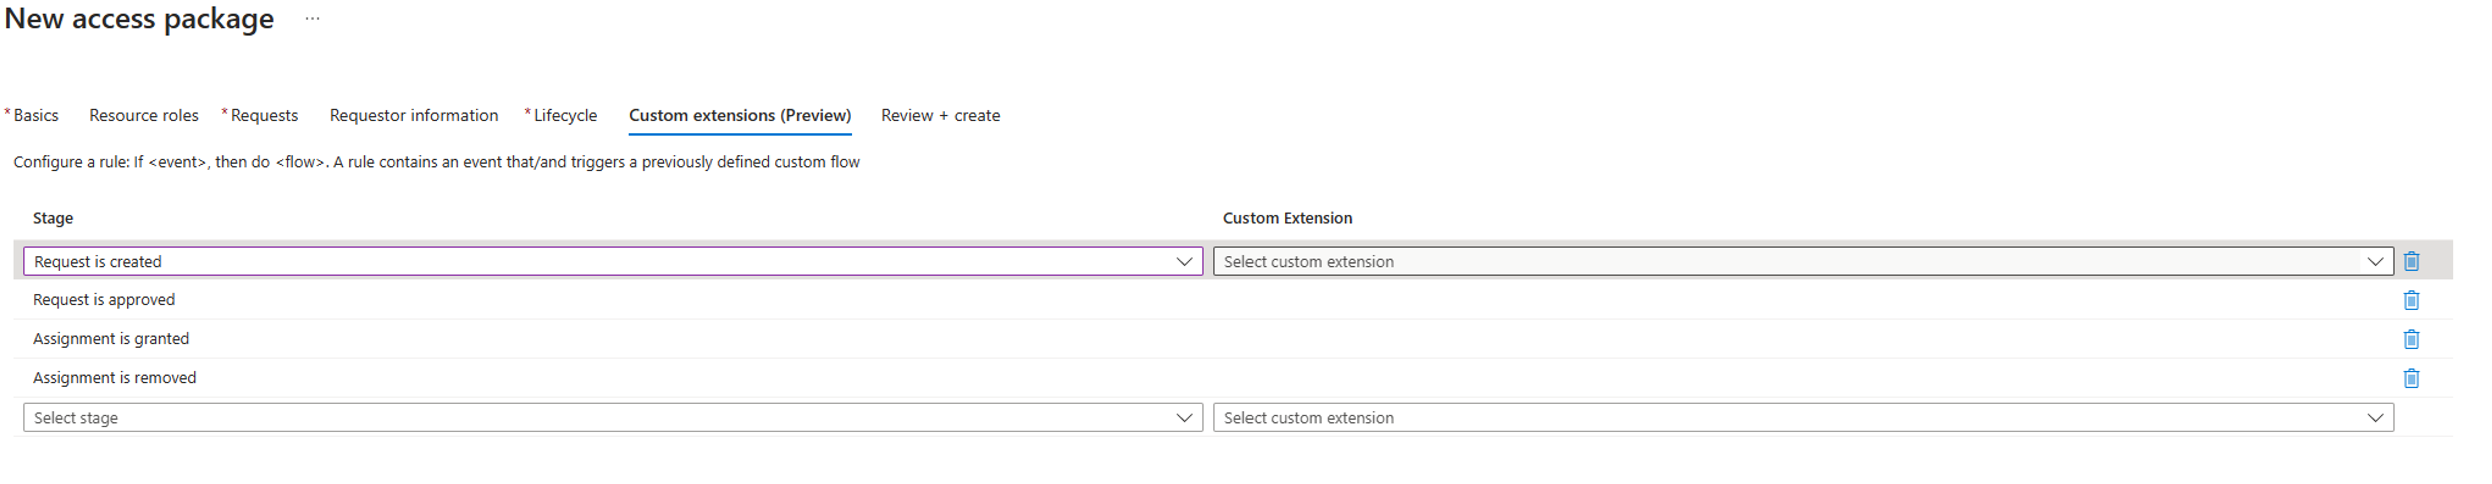 Screenshot of access package policy selection.